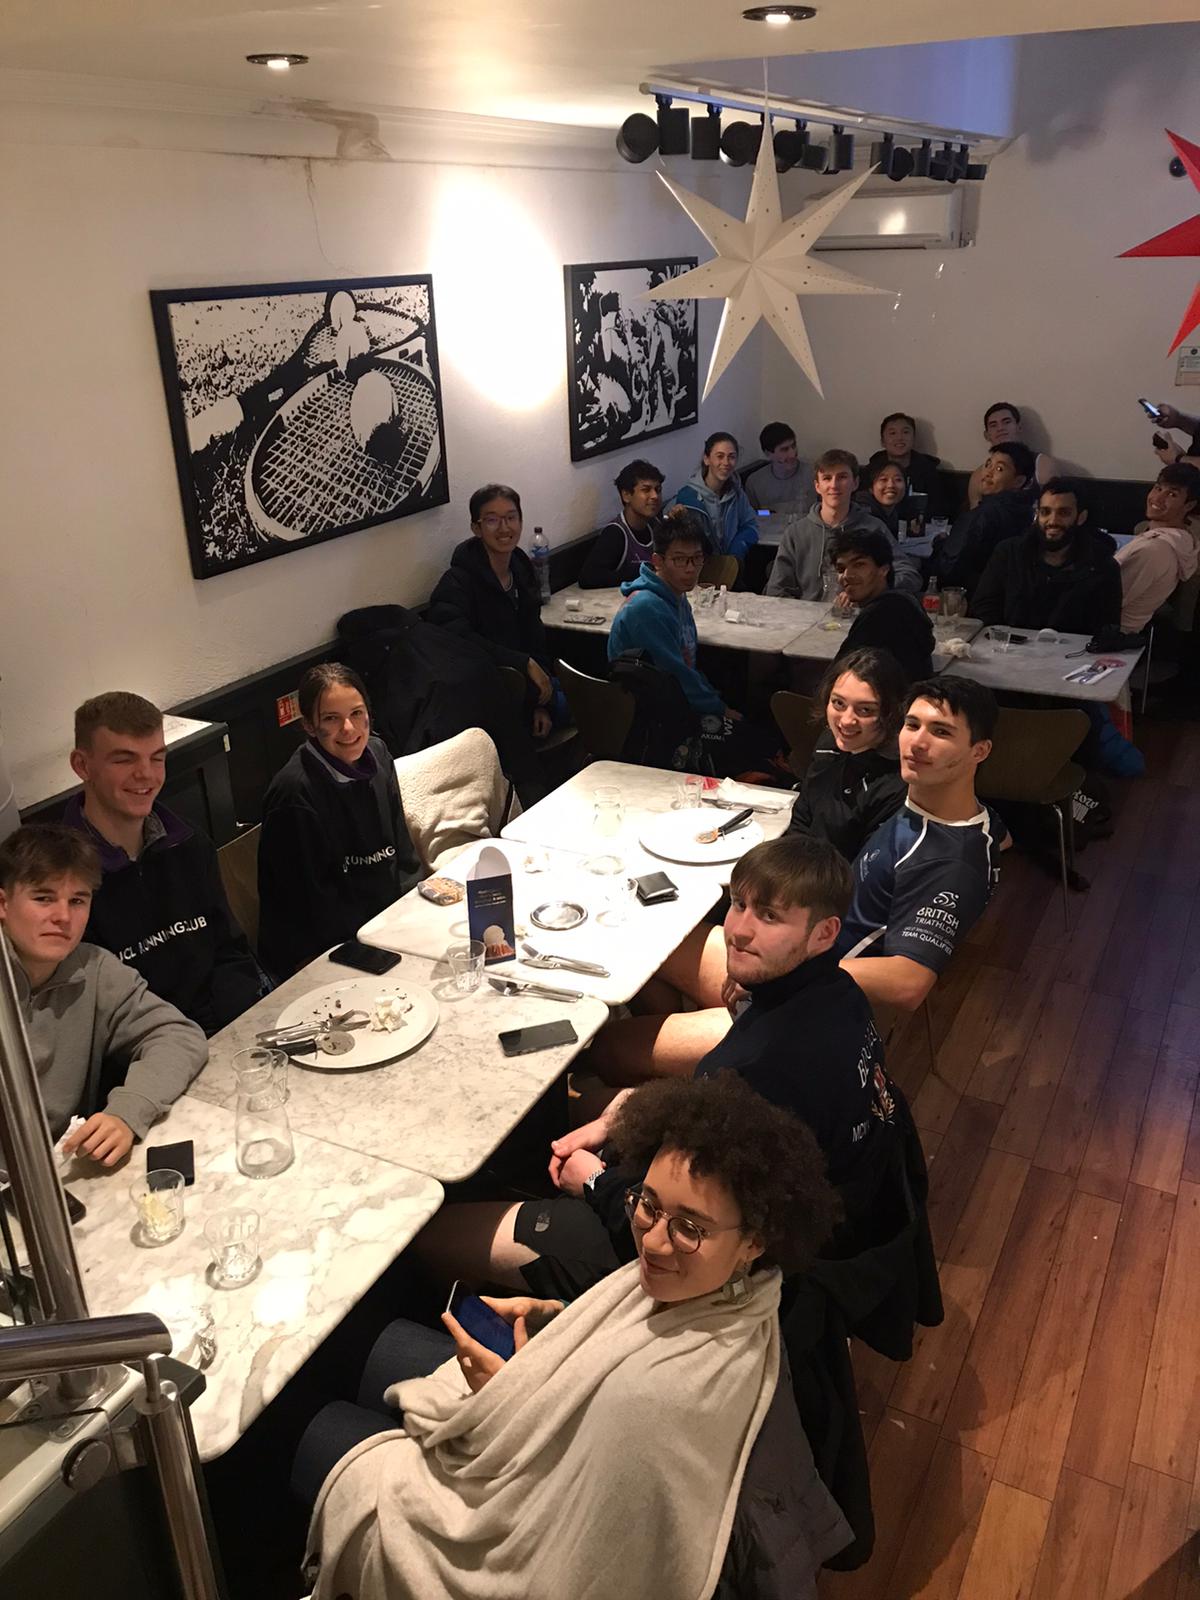 Group photo of runners at a pizza place